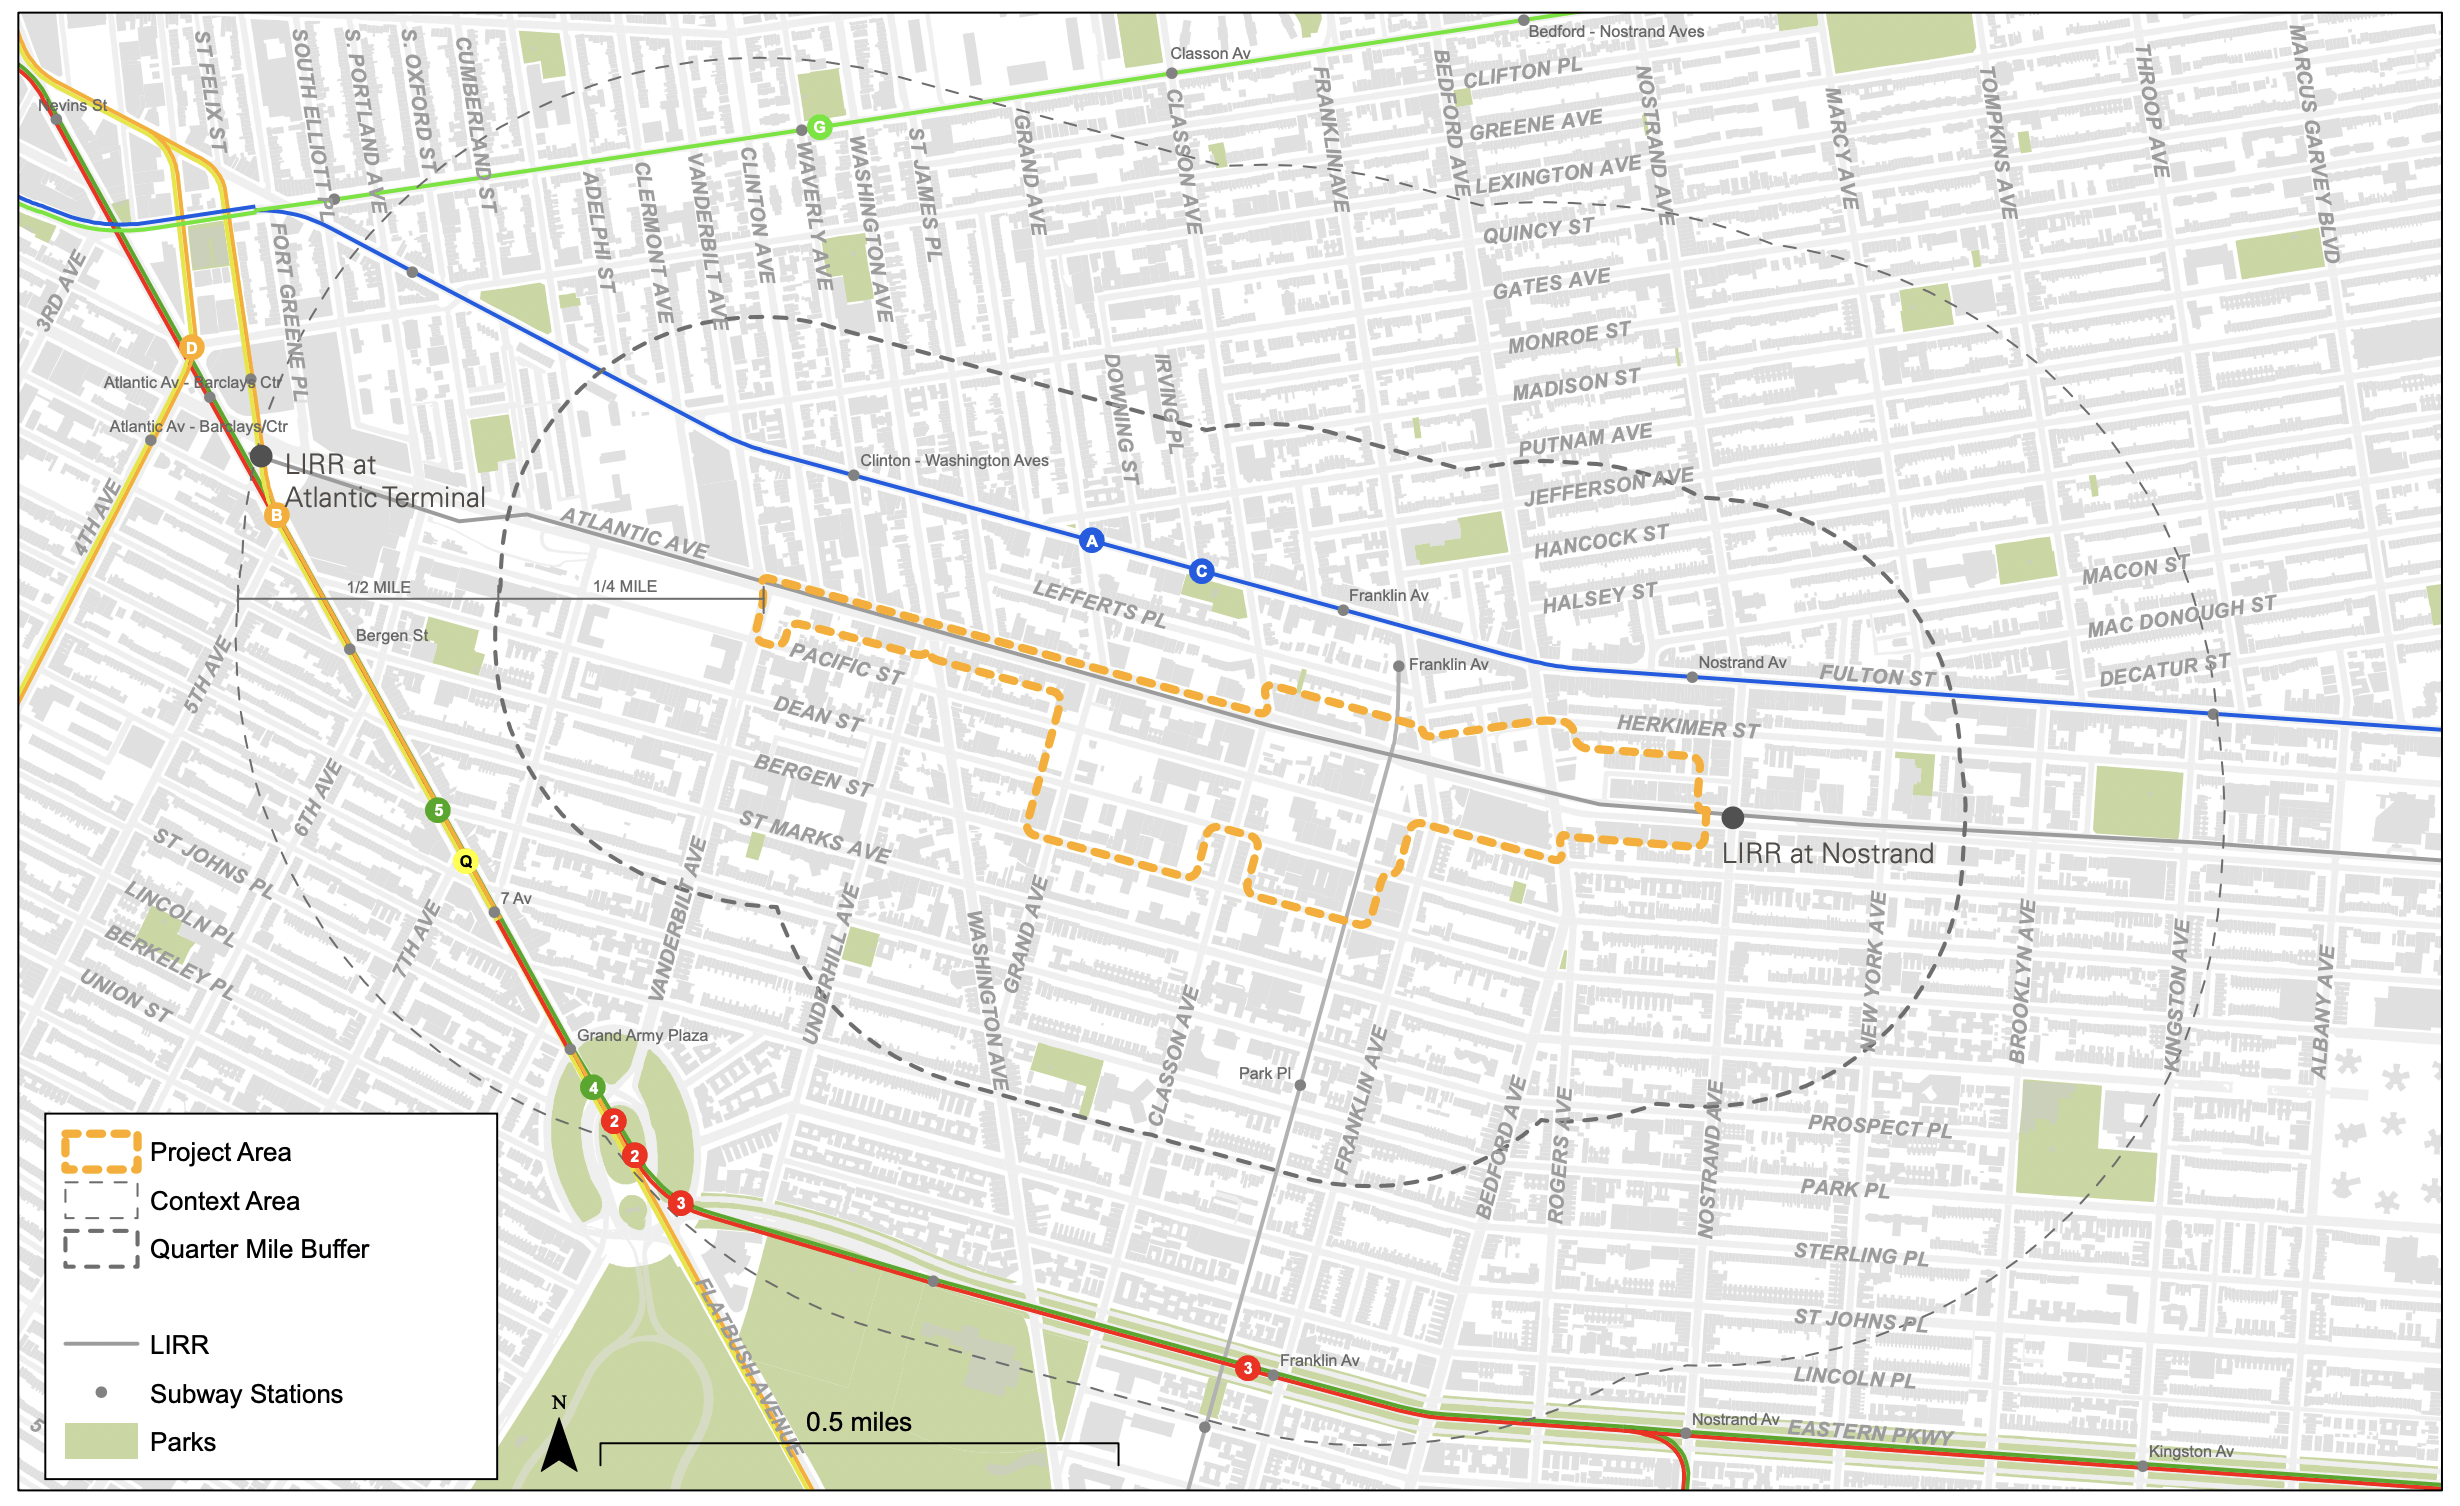 map of the atlantic avenue rezoning project area, the context area and the quarter mile buffer